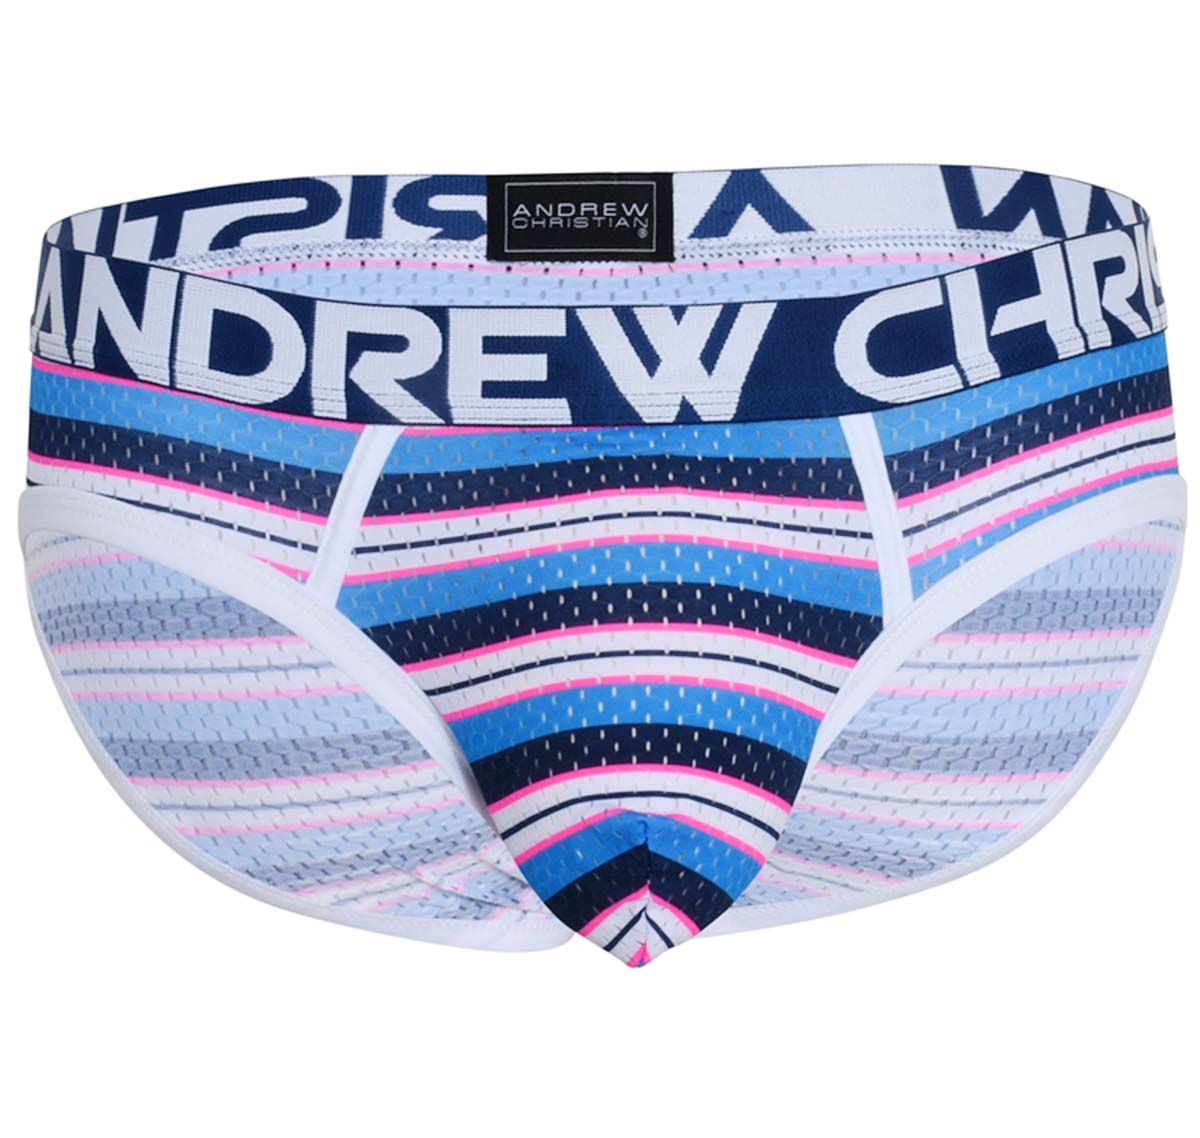 Andrew Christian Slip NEWPORT MESH BRIEF w/ ALMOST NAKED 92366, multicolor